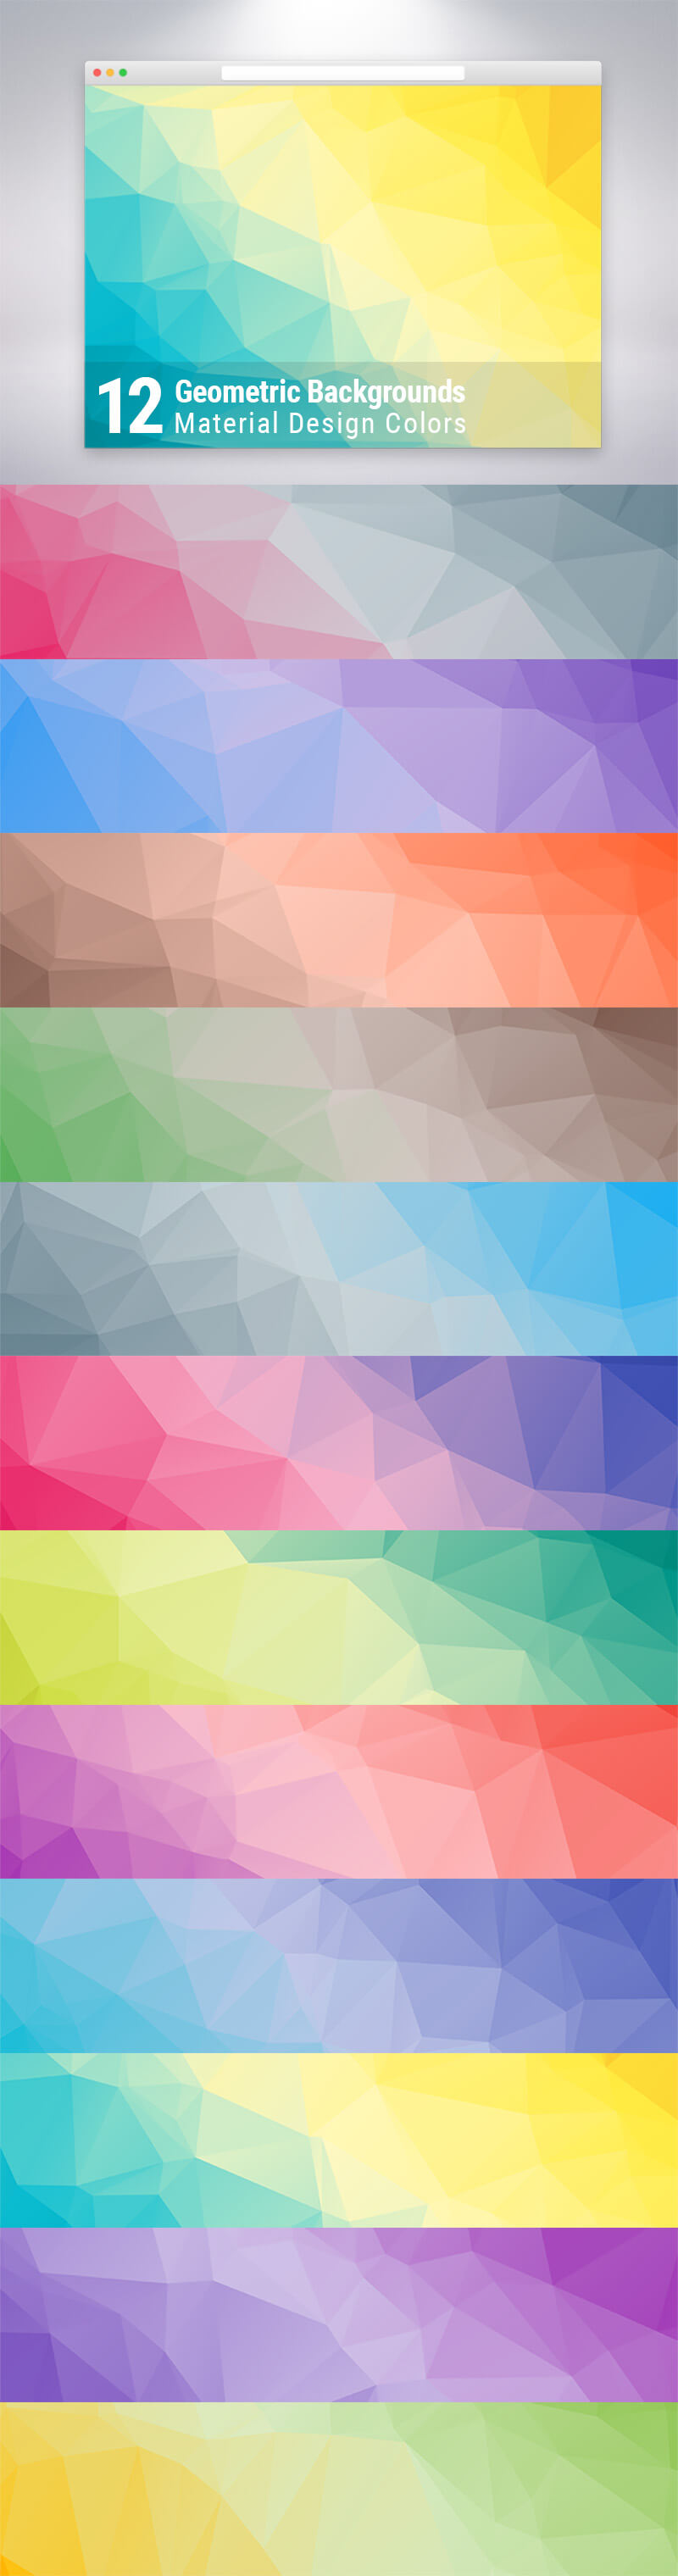 Material Design Geometric Backgrounds Preview